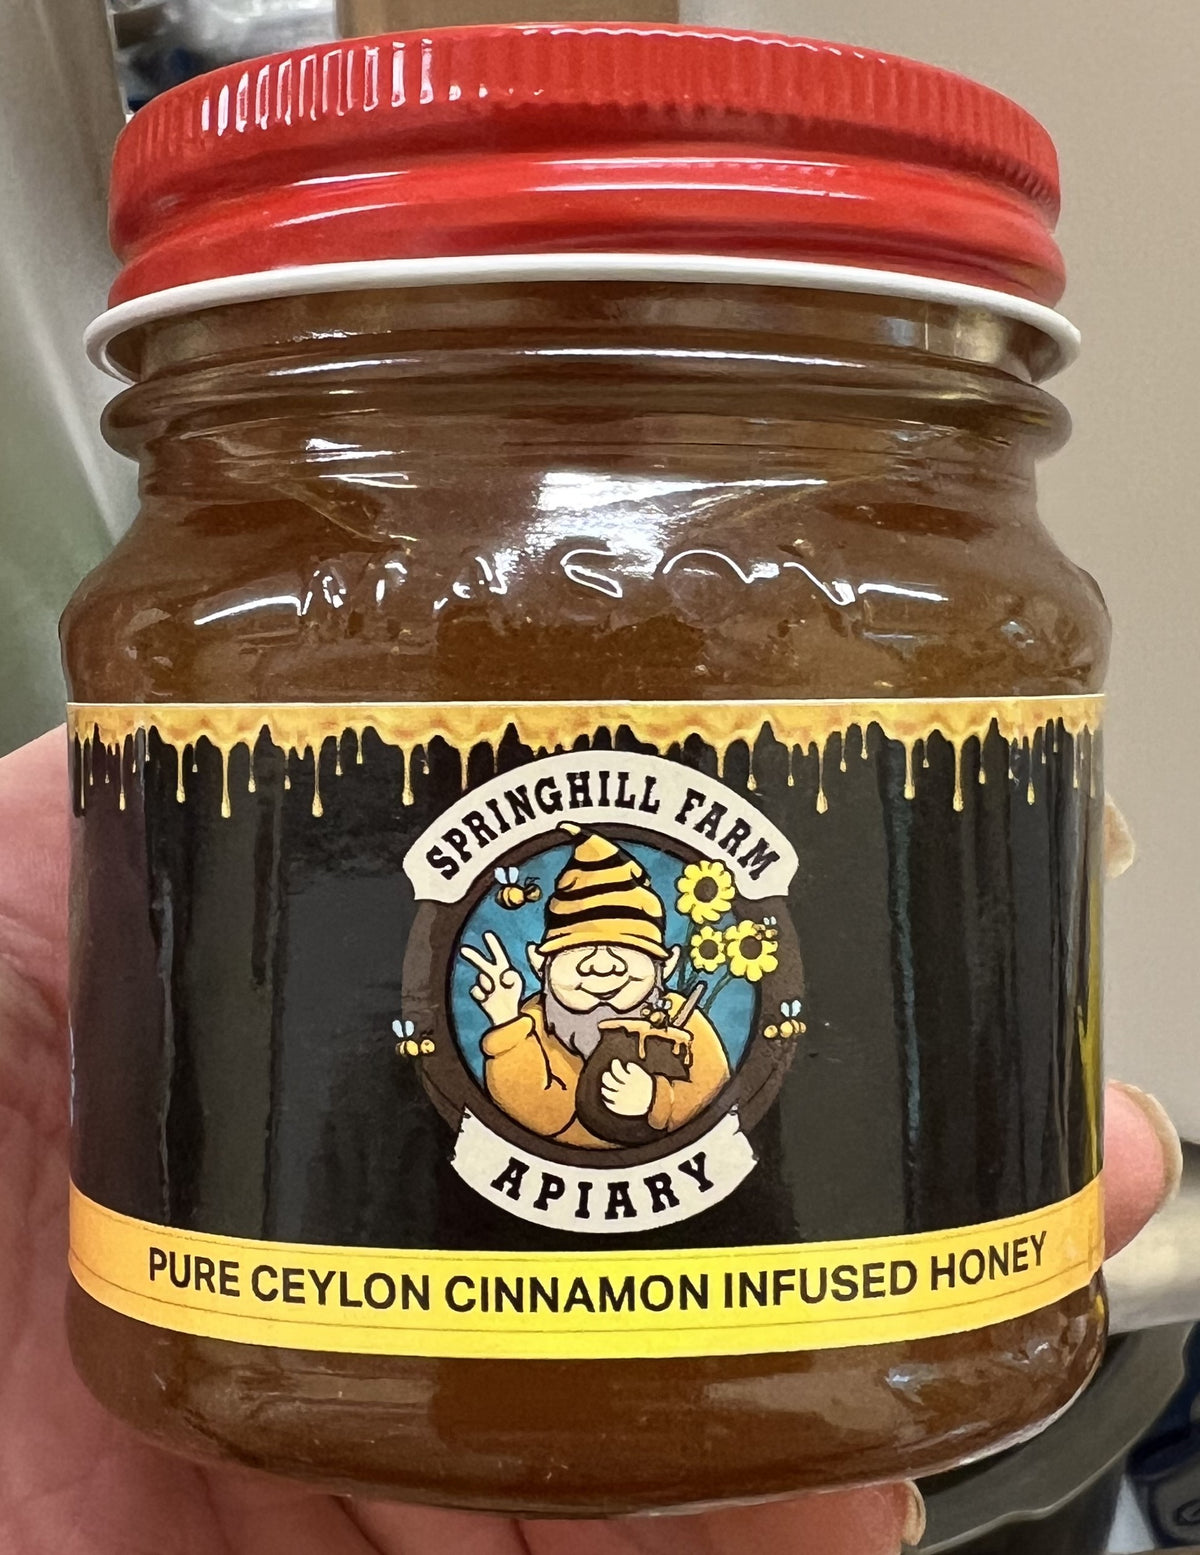 Honey Natural Celyon Cinnanon Infused Honey (approximately 14 oz)